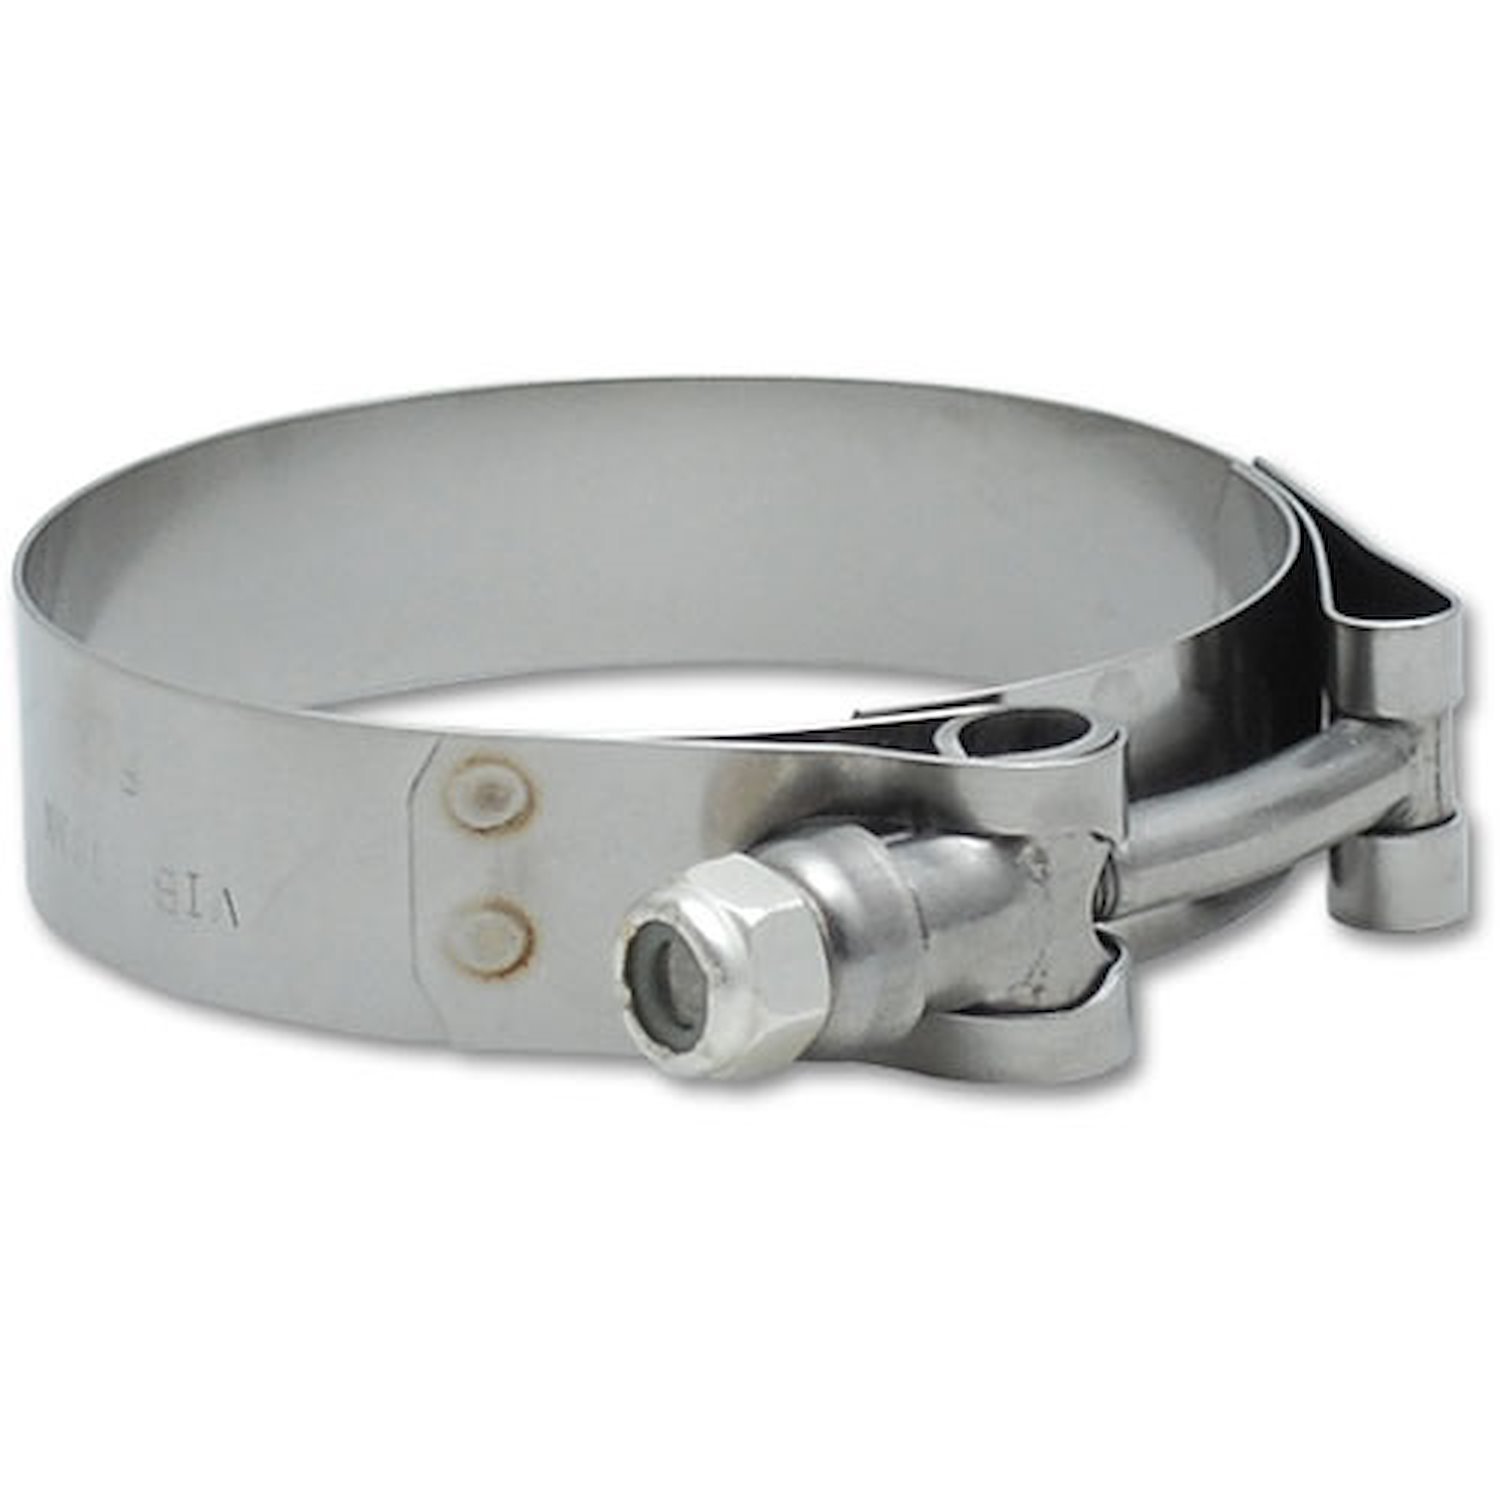 Stainless Steel T-Bolt Clamps Clamp Range 2" - 2.30"